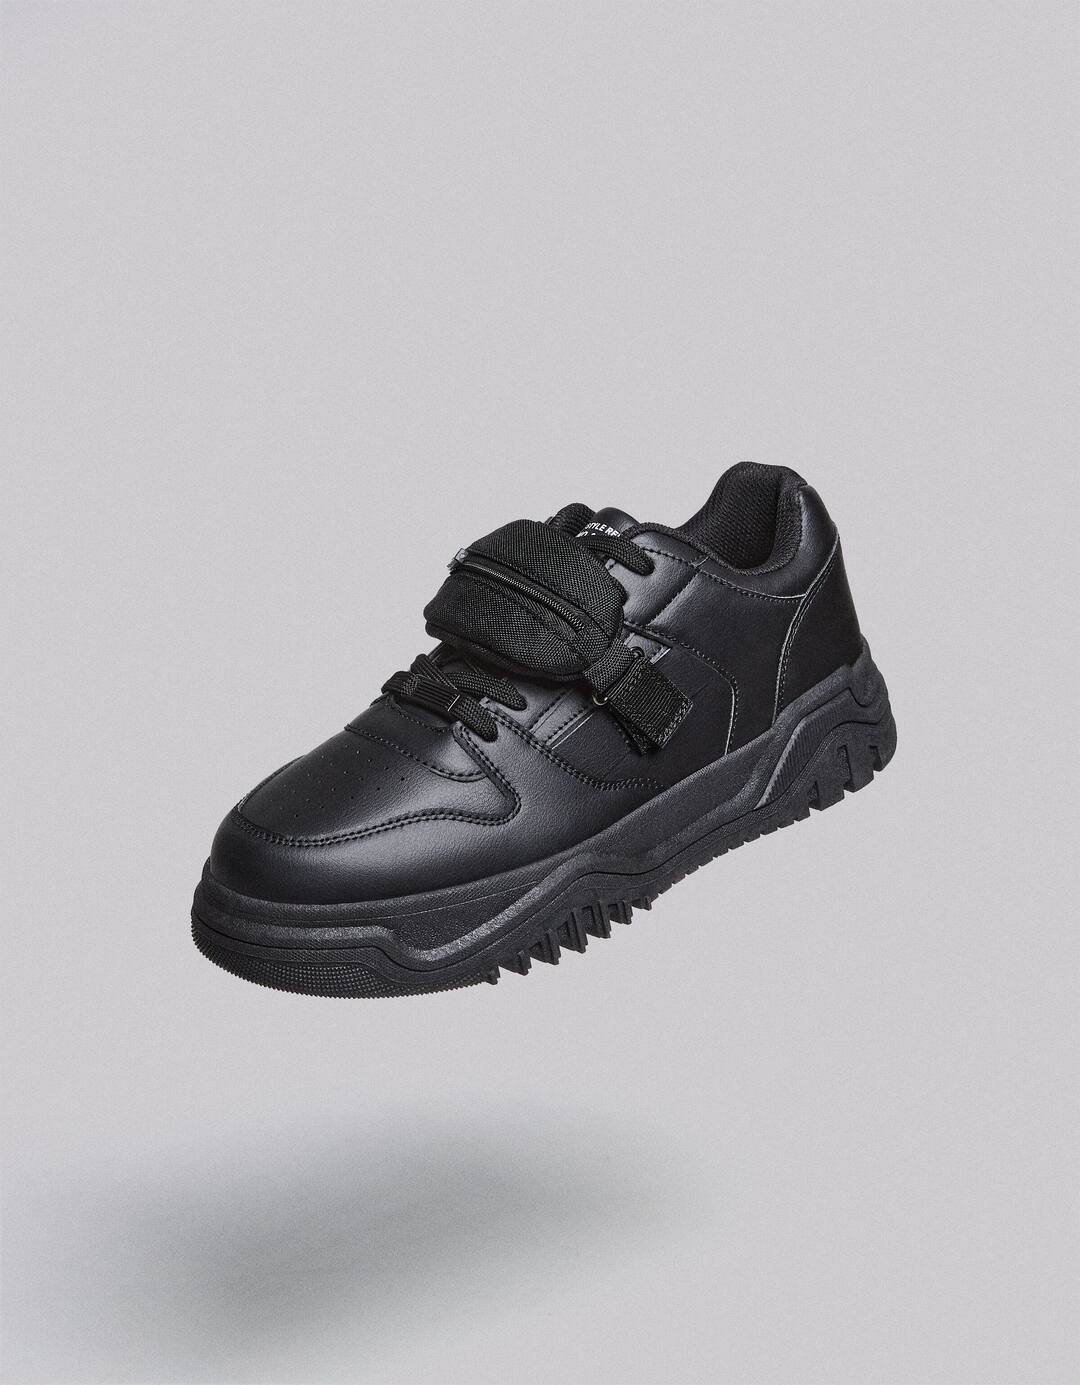 Men’s trainers with a removable pocket